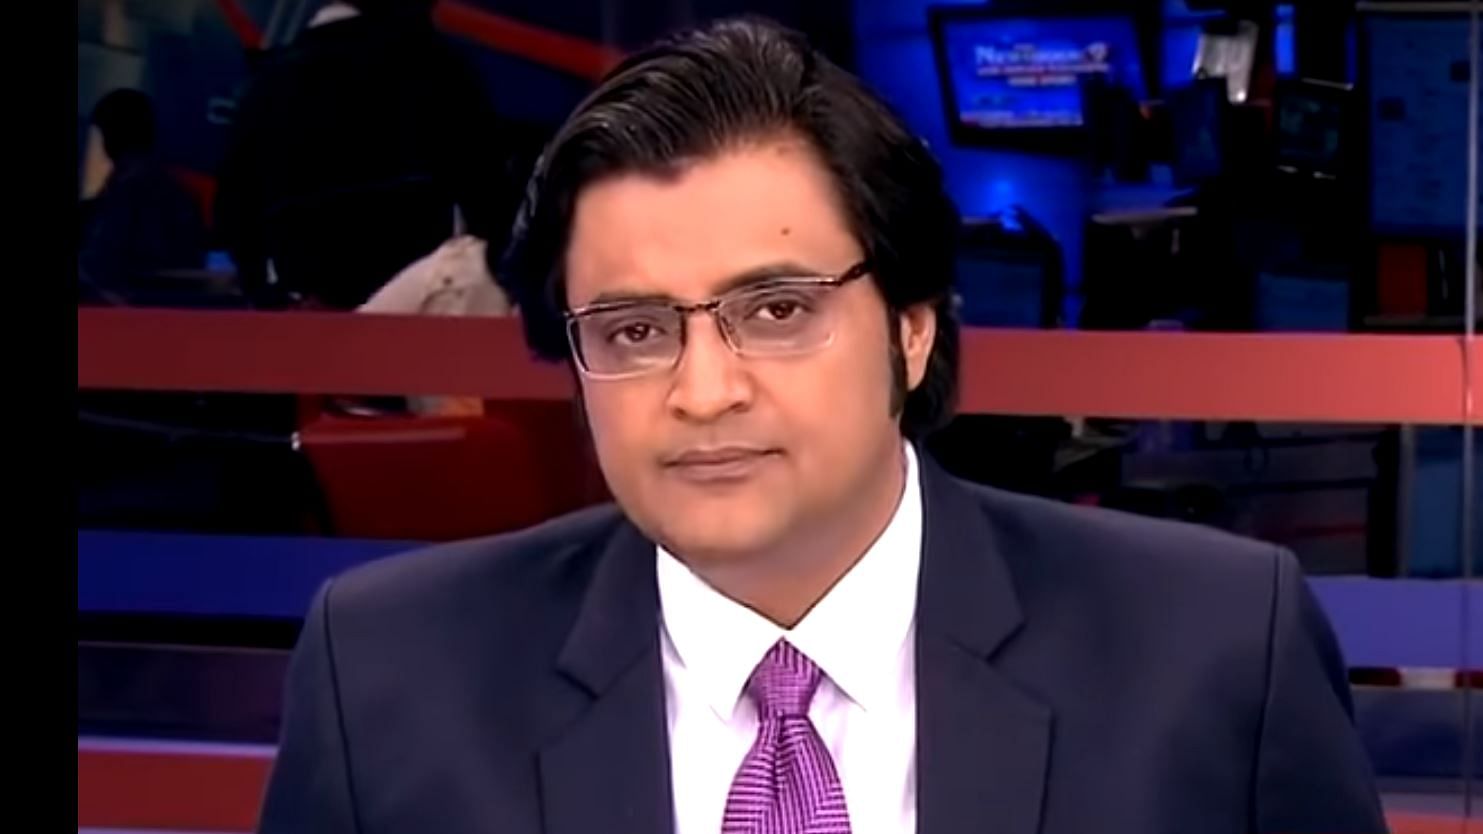 Since the news of India’s surgical strikes across the LoC first broke, Arnab has been  taking a laudatory stance defending the Centre. (Photo Courtesy: YouTube/<a href="https://www.youtube.com/channel/UC6RJ7-PaXg6TIH2BzZfTV7w">TIMES NOW</a>)